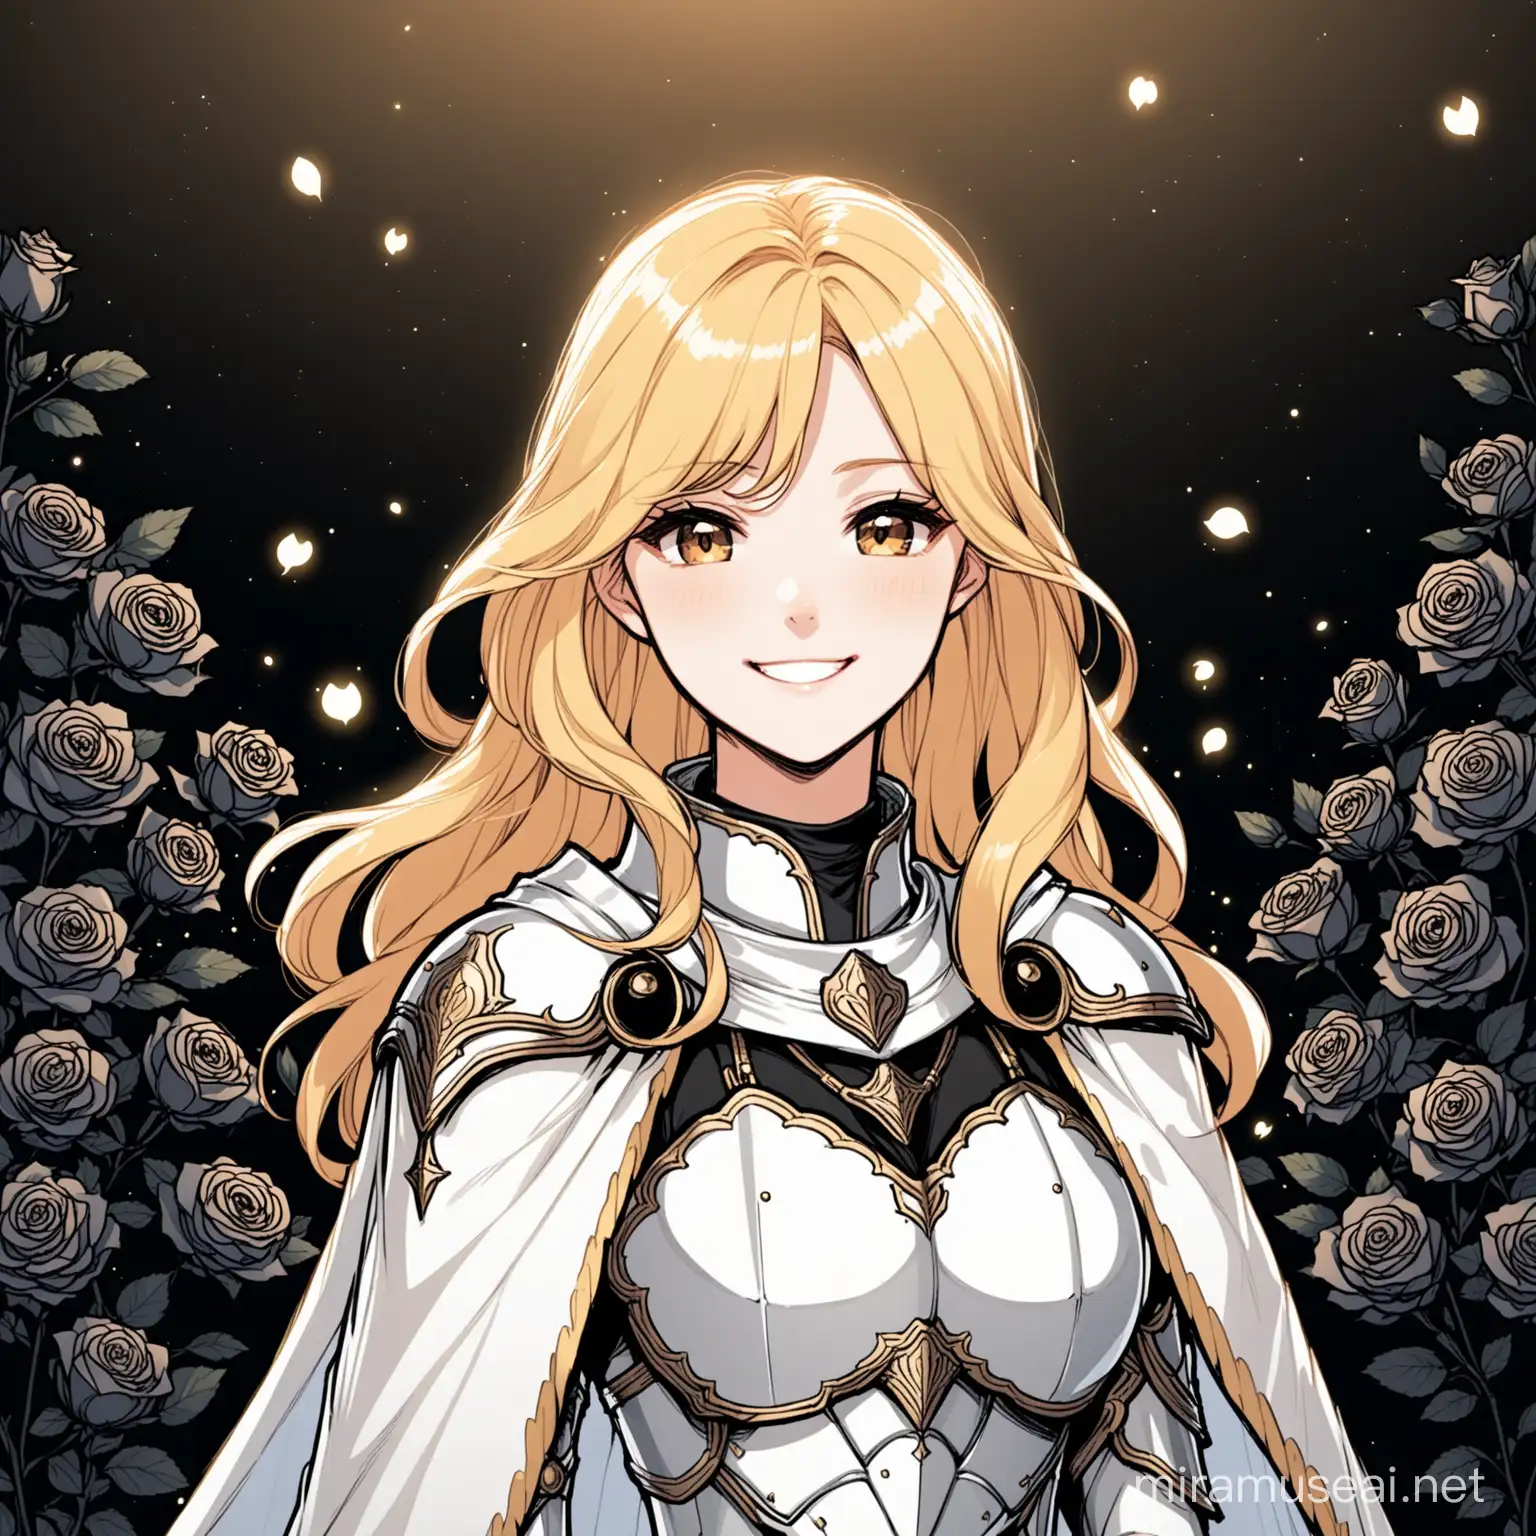 A smiling woman with wild wavy blonde hair wearing white light armor and cape against a background of black roses and decor; Korean webtoon style